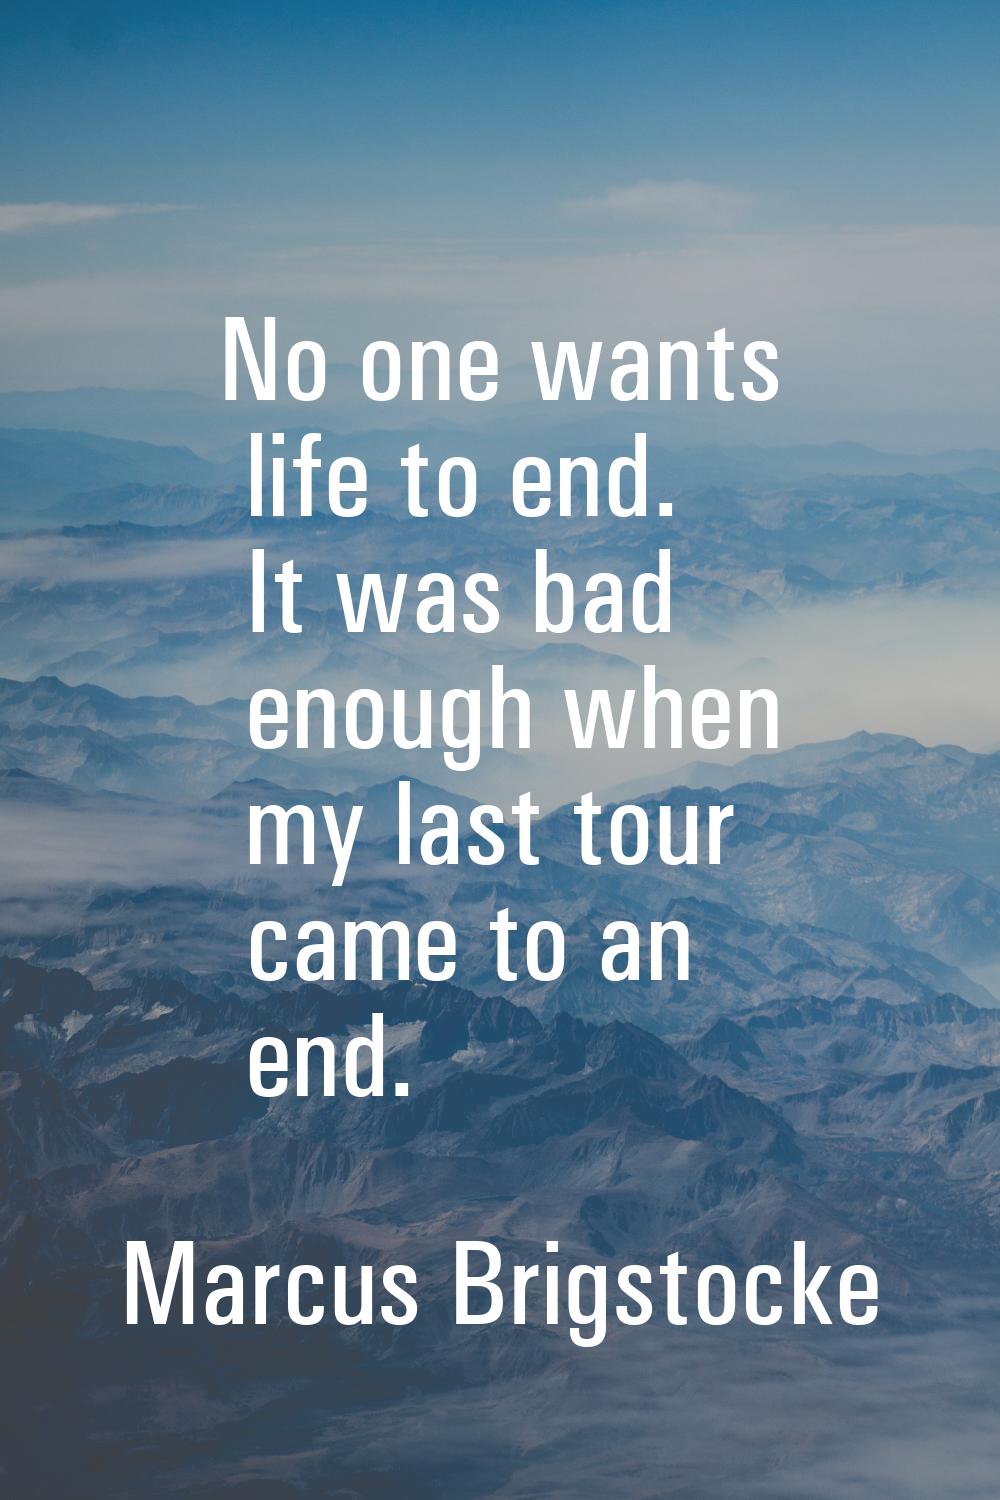 No one wants life to end. It was bad enough when my last tour came to an end.